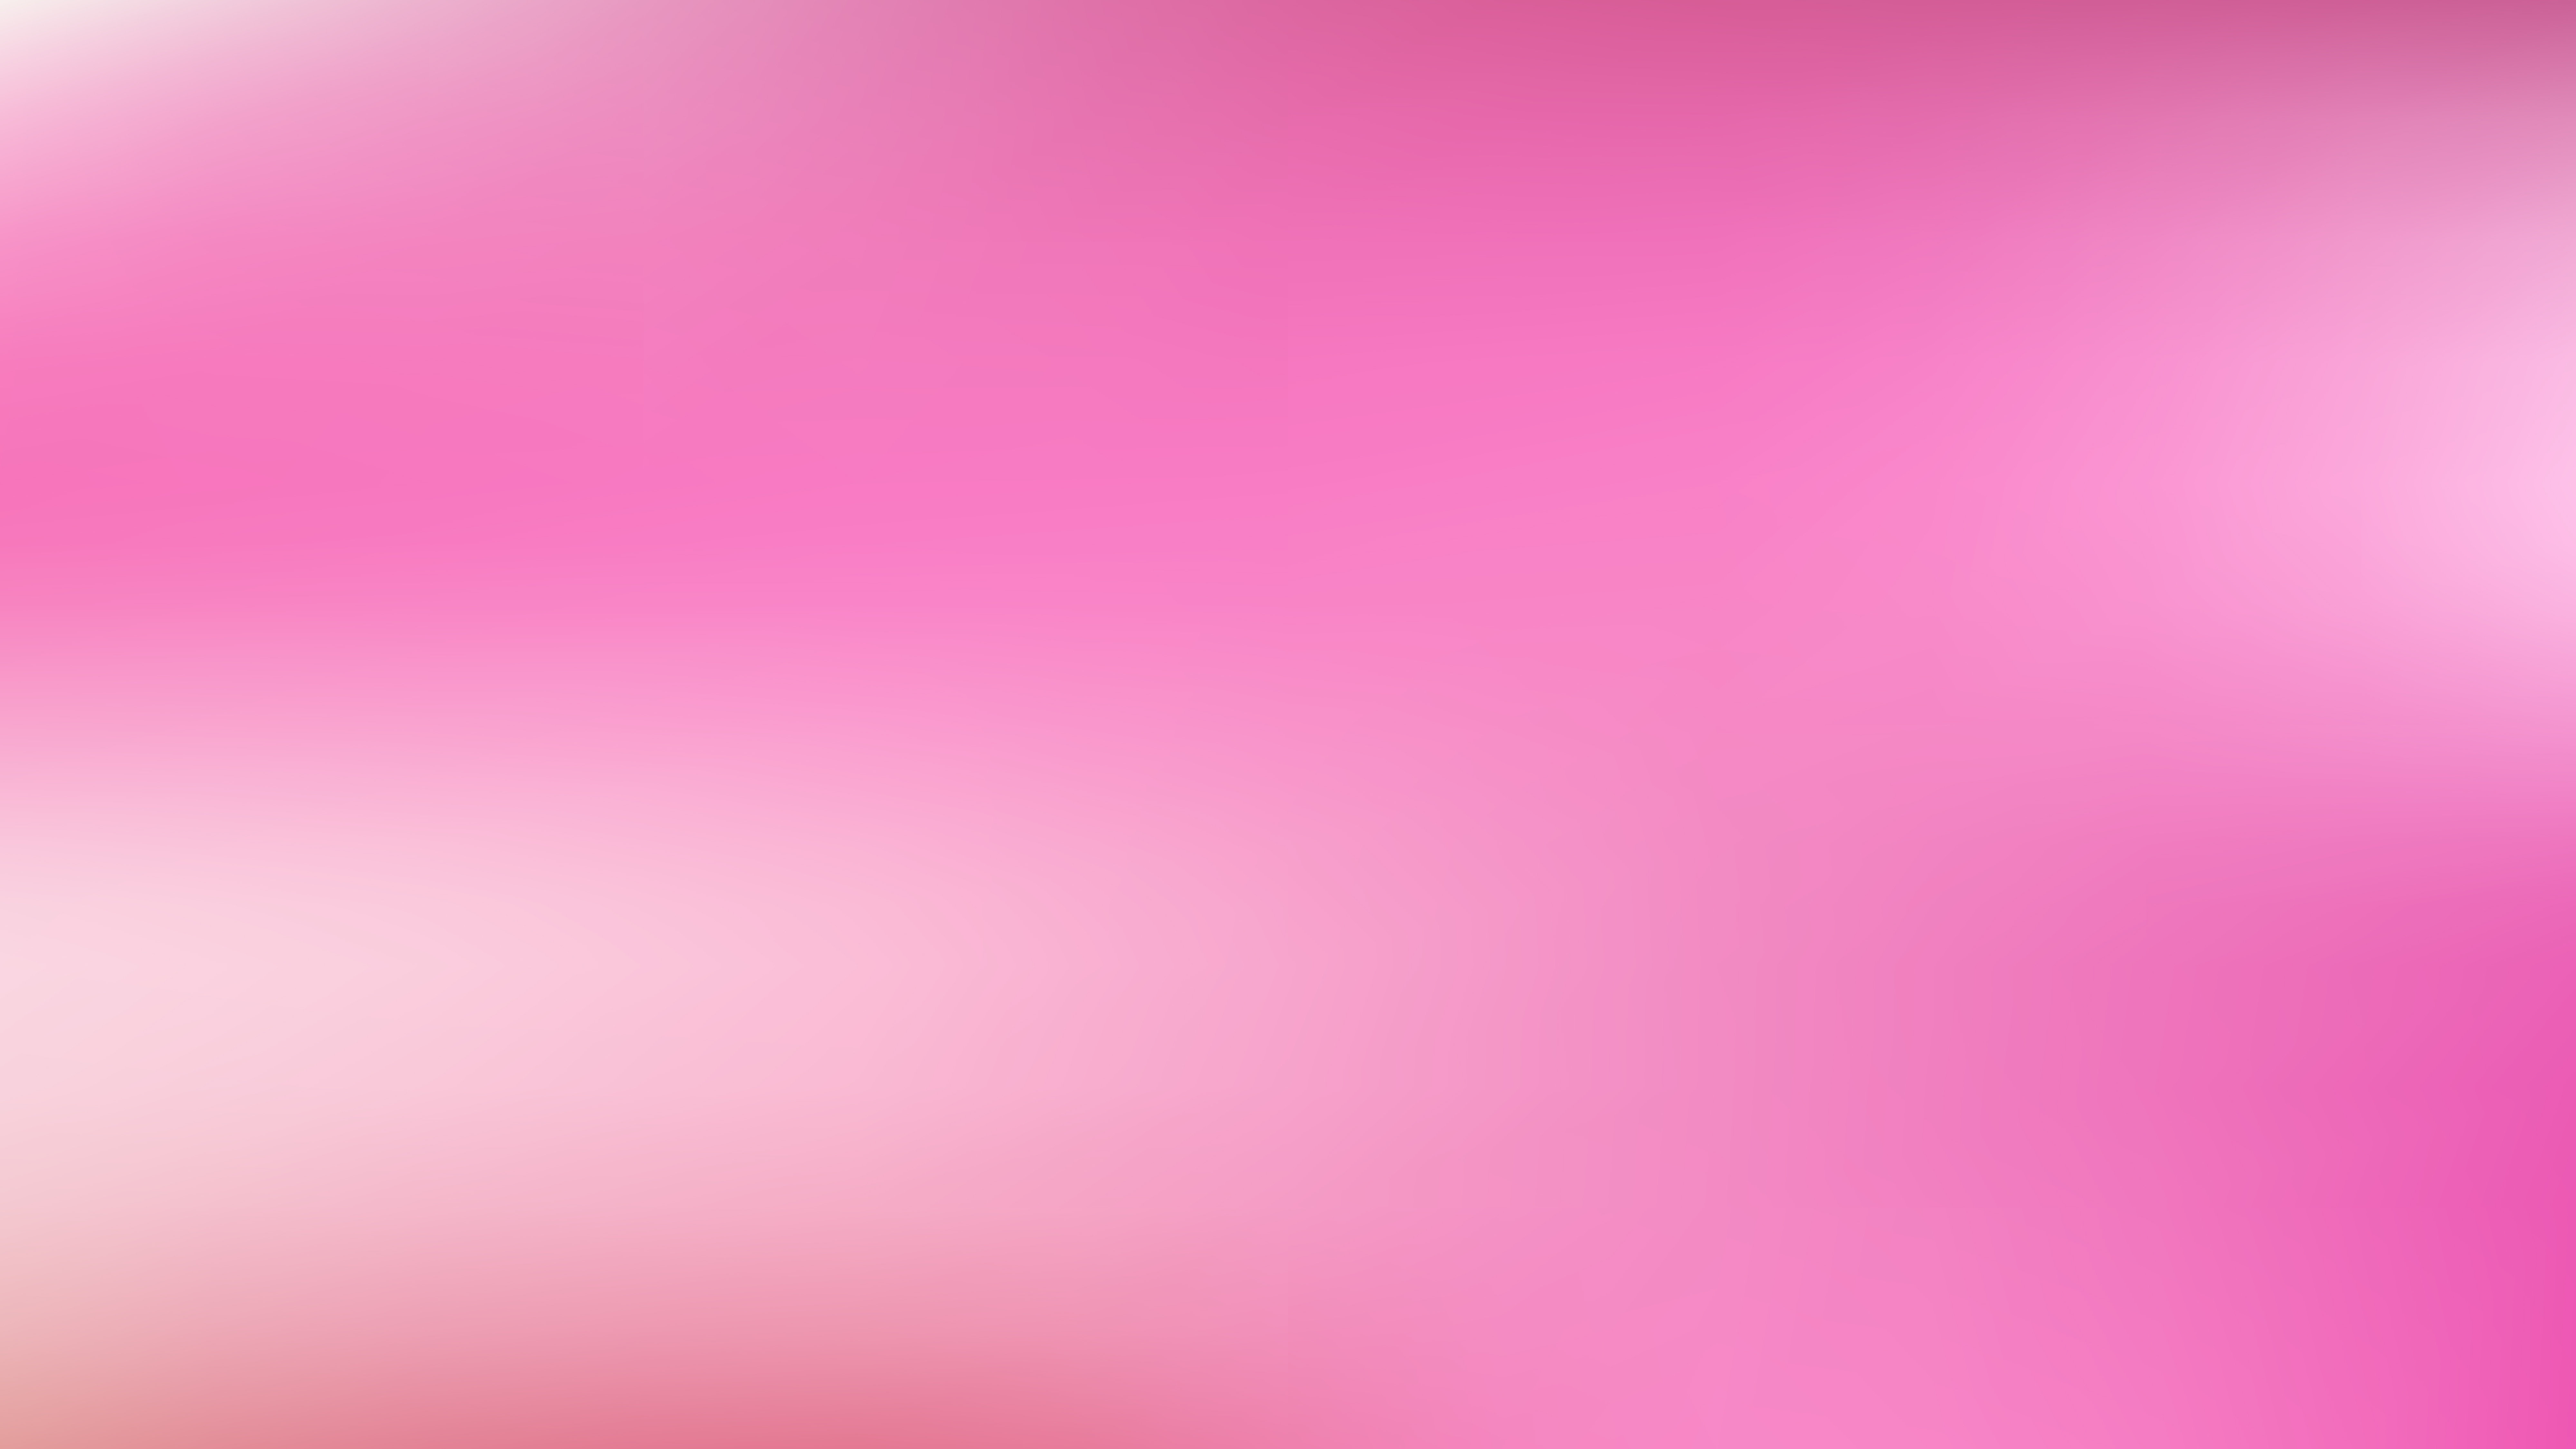 Free Pink Blur Background Vector Graphic